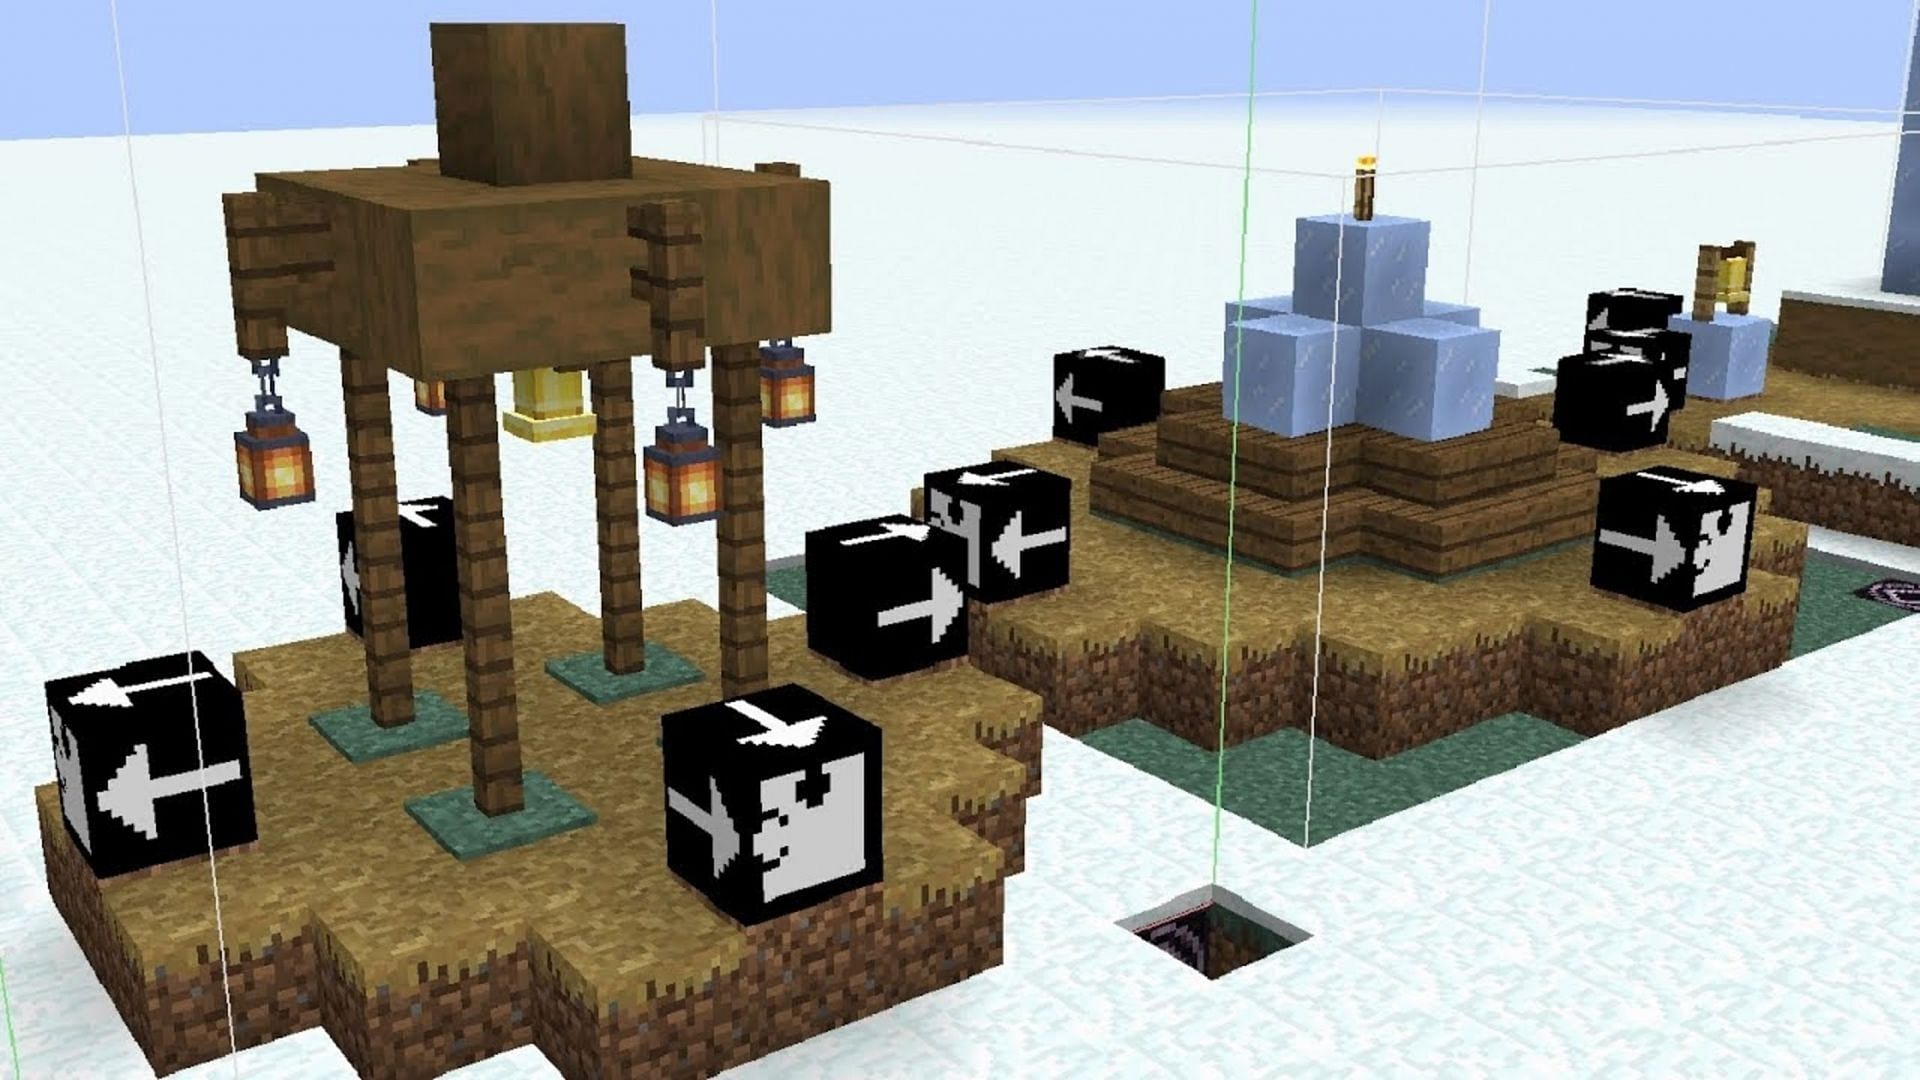 Jigsaw blocks can create structures in-game (Image via Phoenix SC/YouTube)